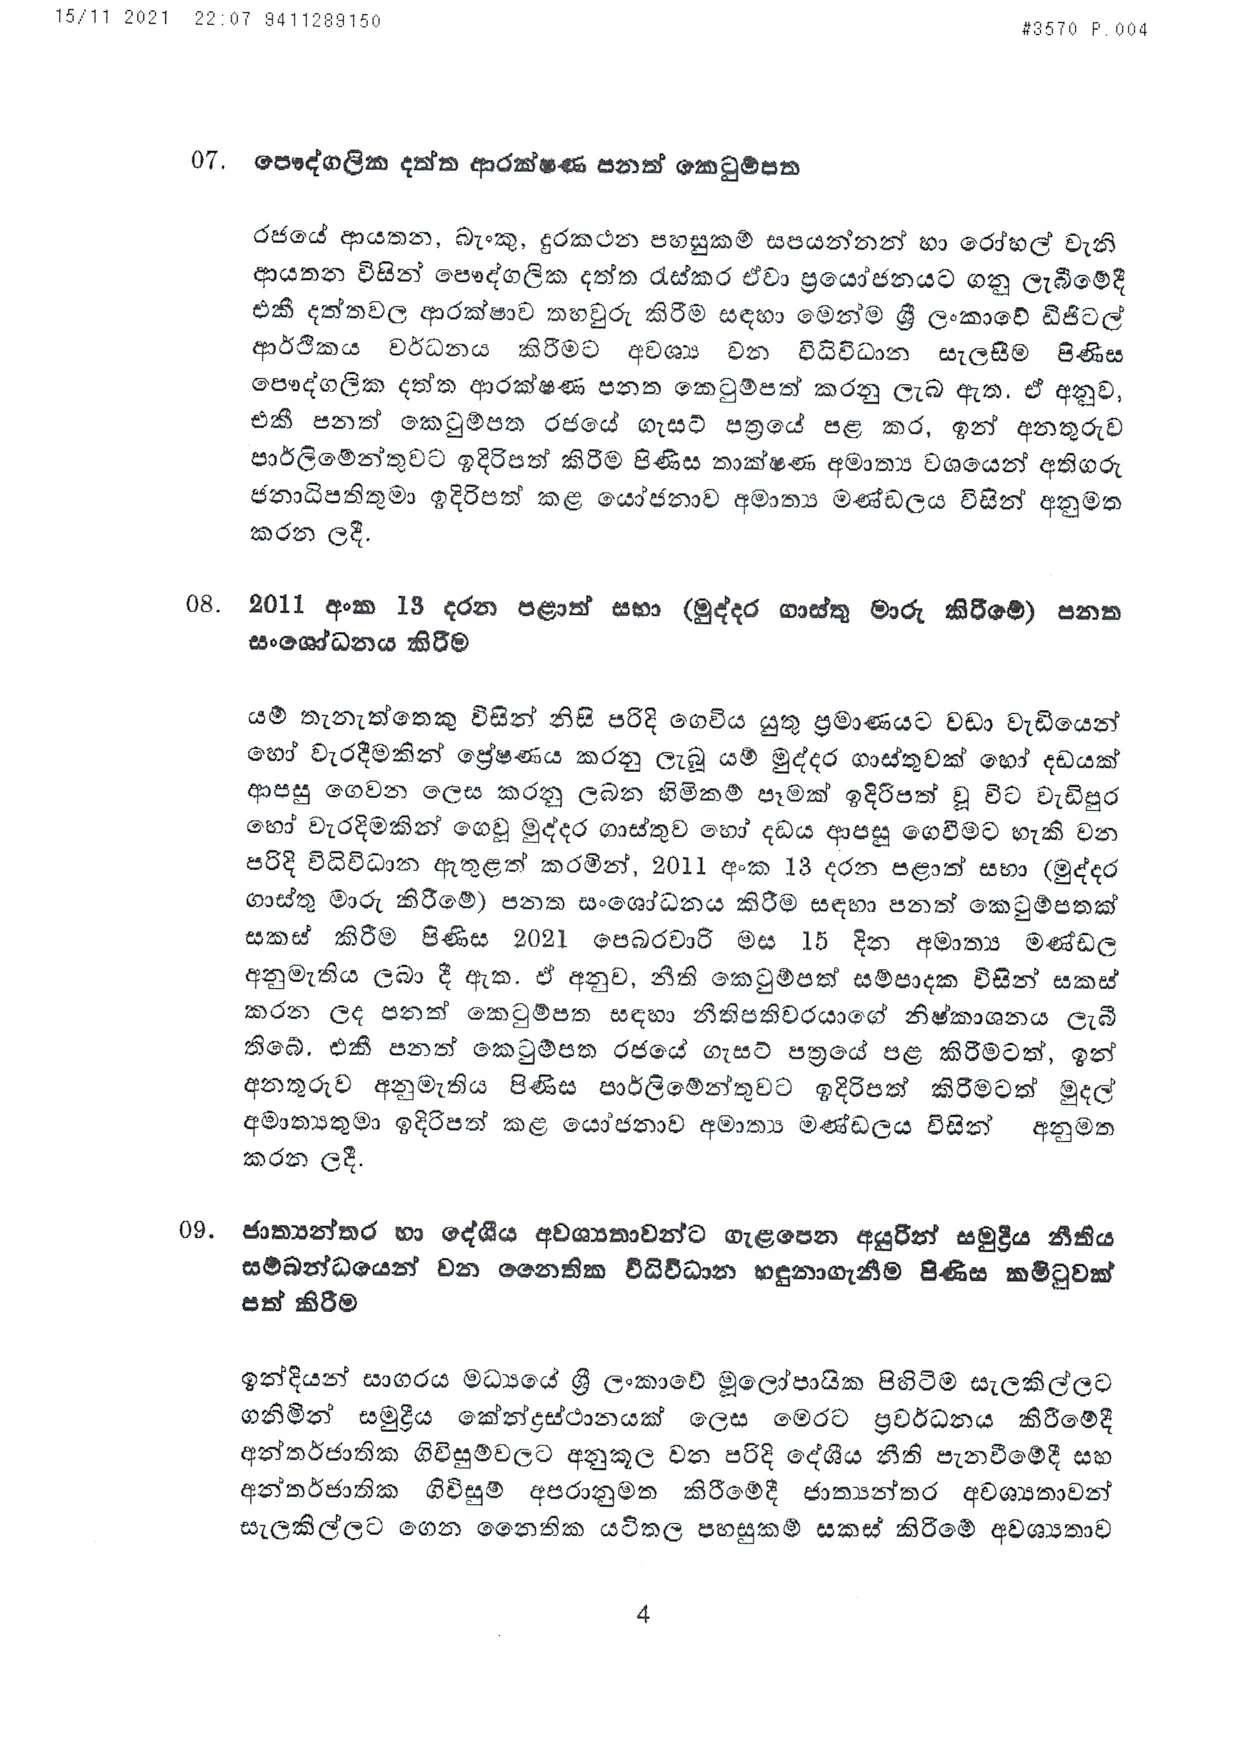 Cabinet Decision on 15.11.2021 compressed page 004